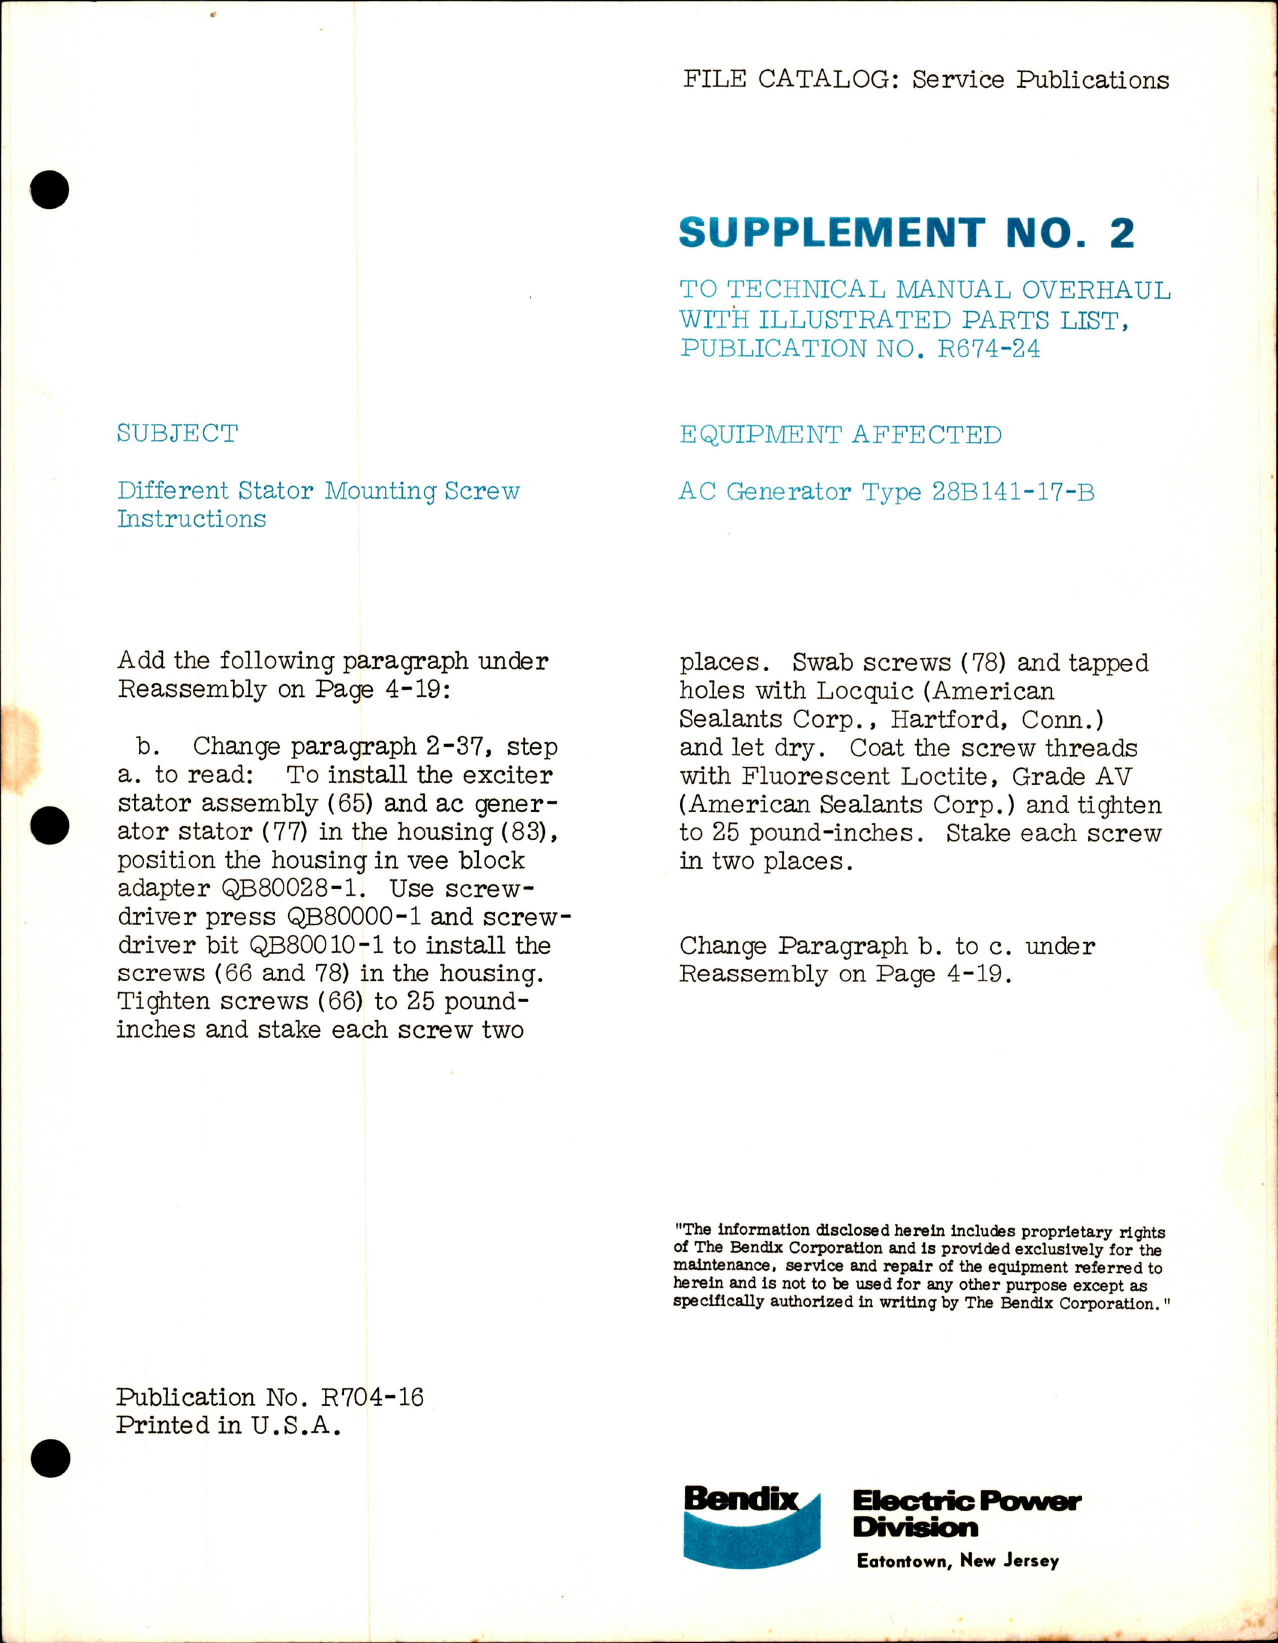 Sample page 1 from AirCorps Library document: Supplement No. 2 to Overhaul Instructions with Parts List - Publication No. R674-24 - AC Generator - Type 28B141-17-B